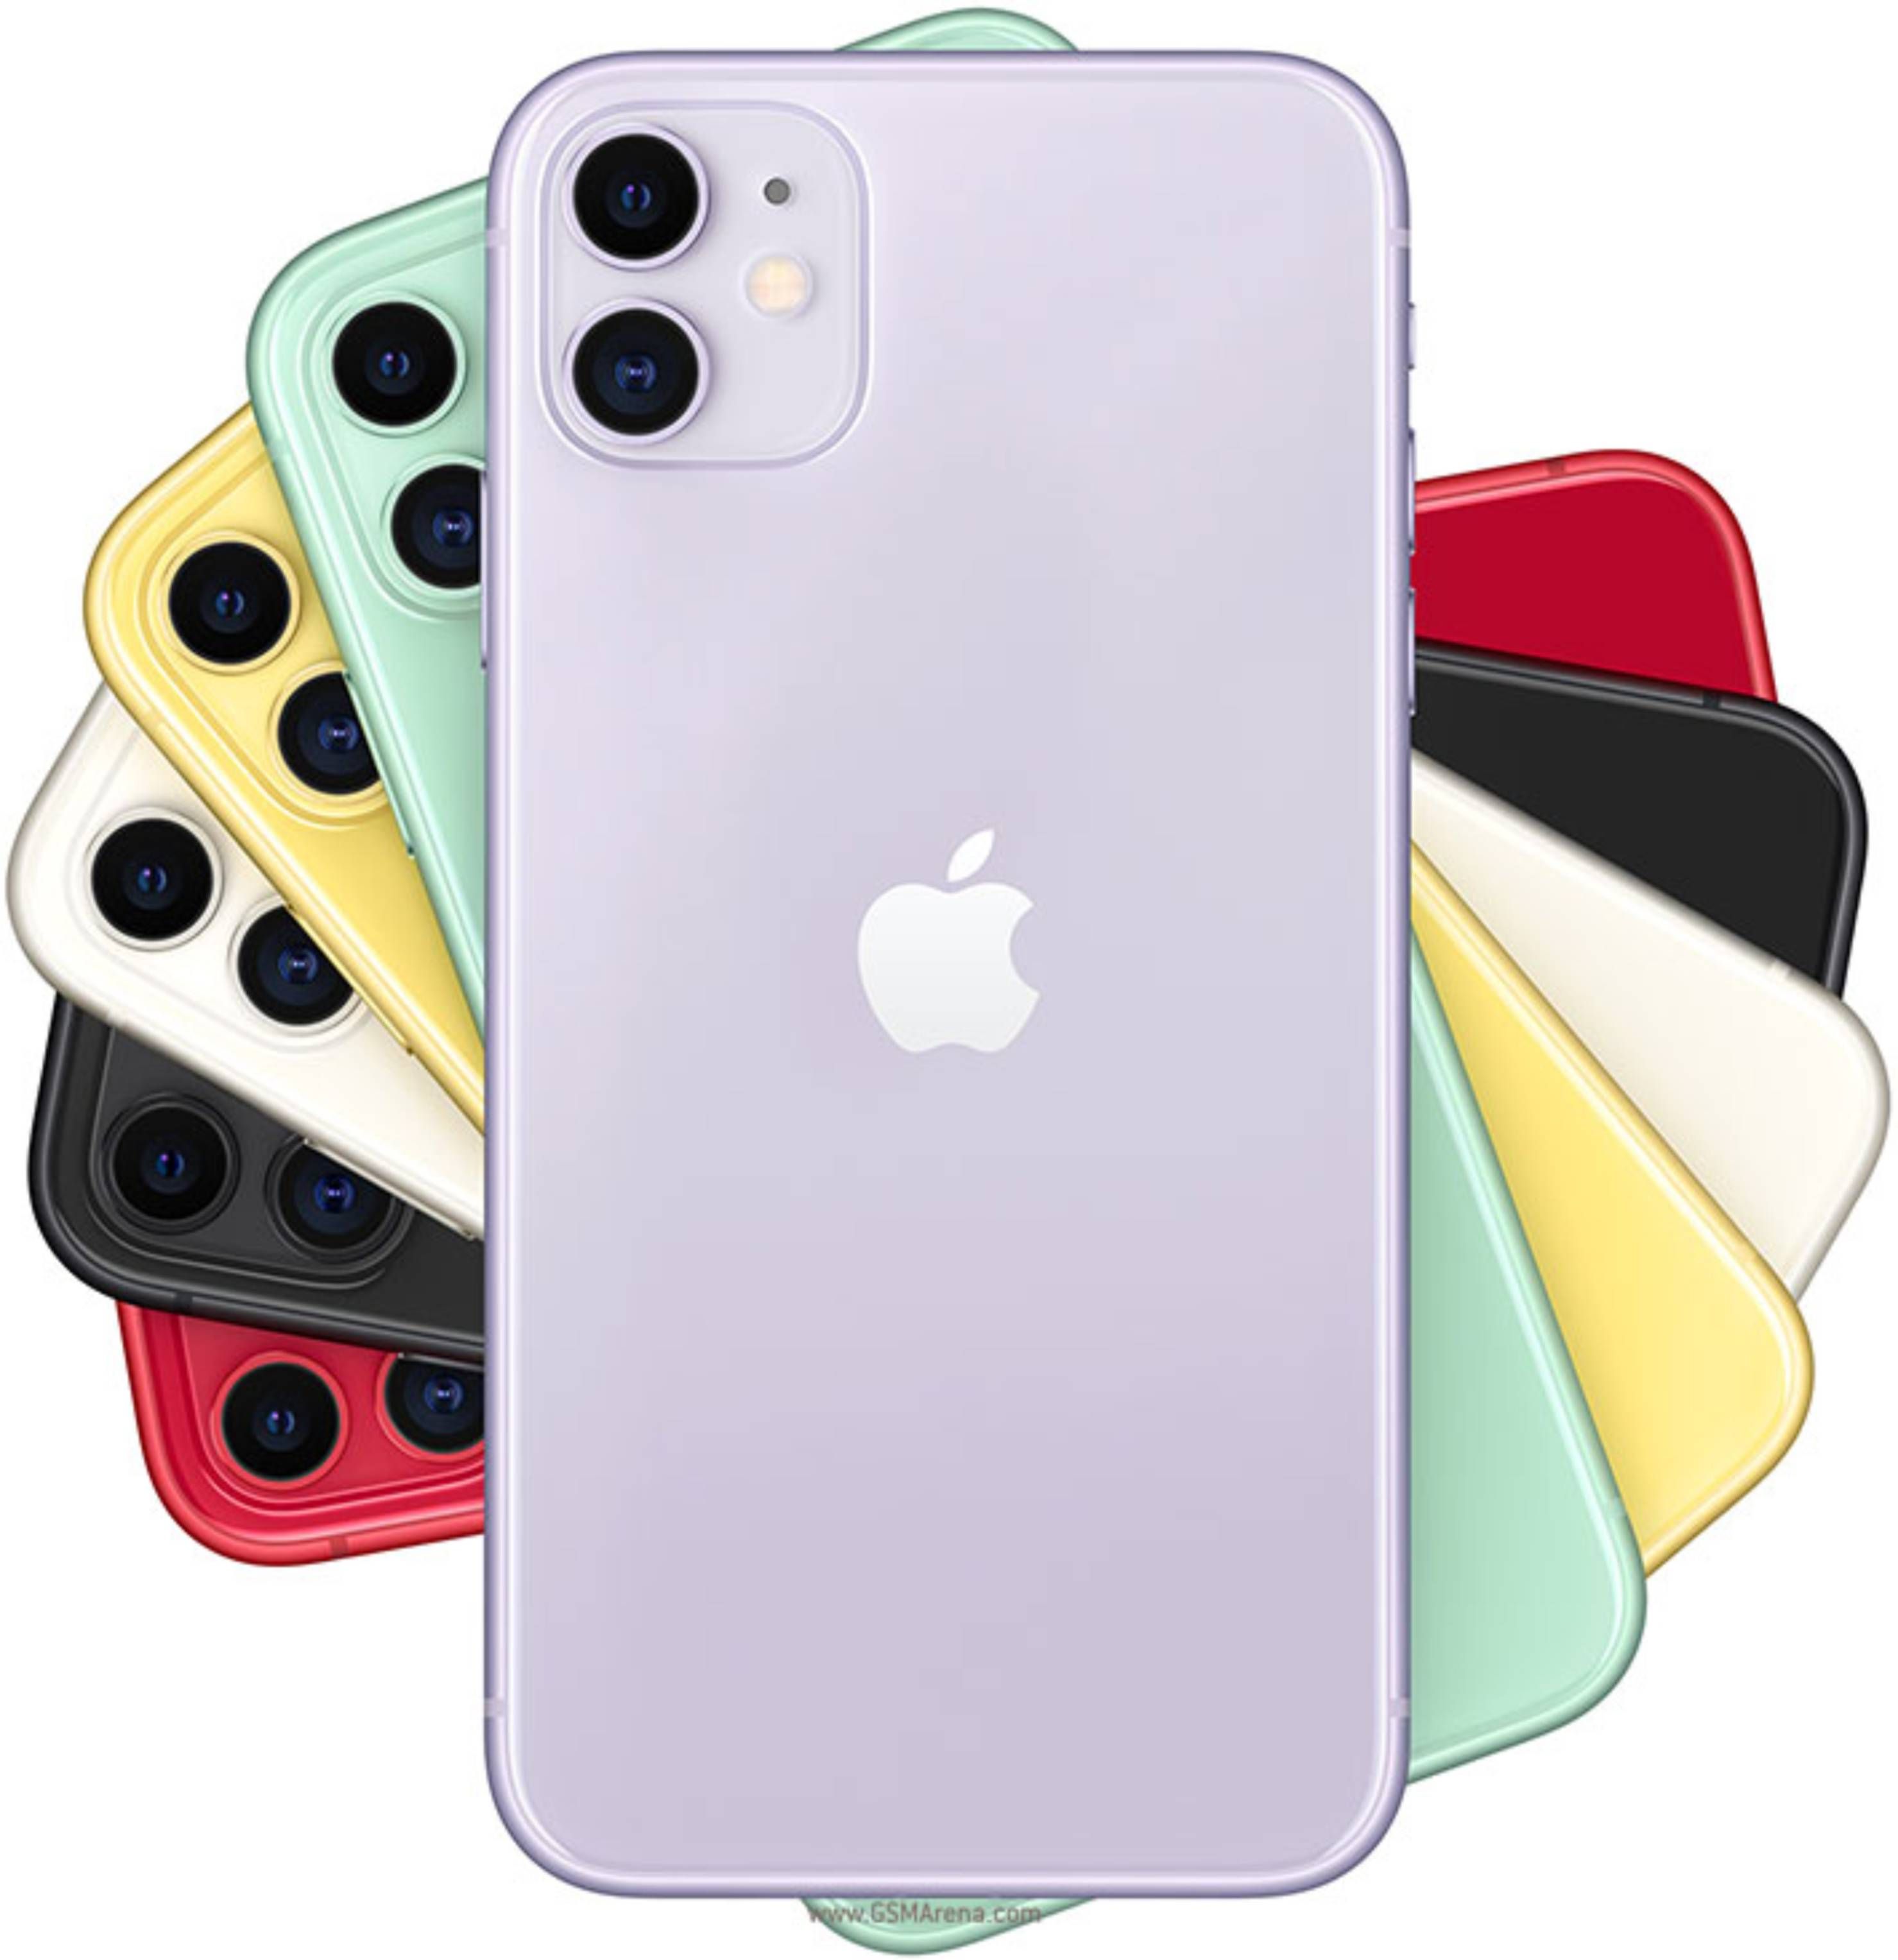 Apple iPhone 11 Specifications and Price in Kenya